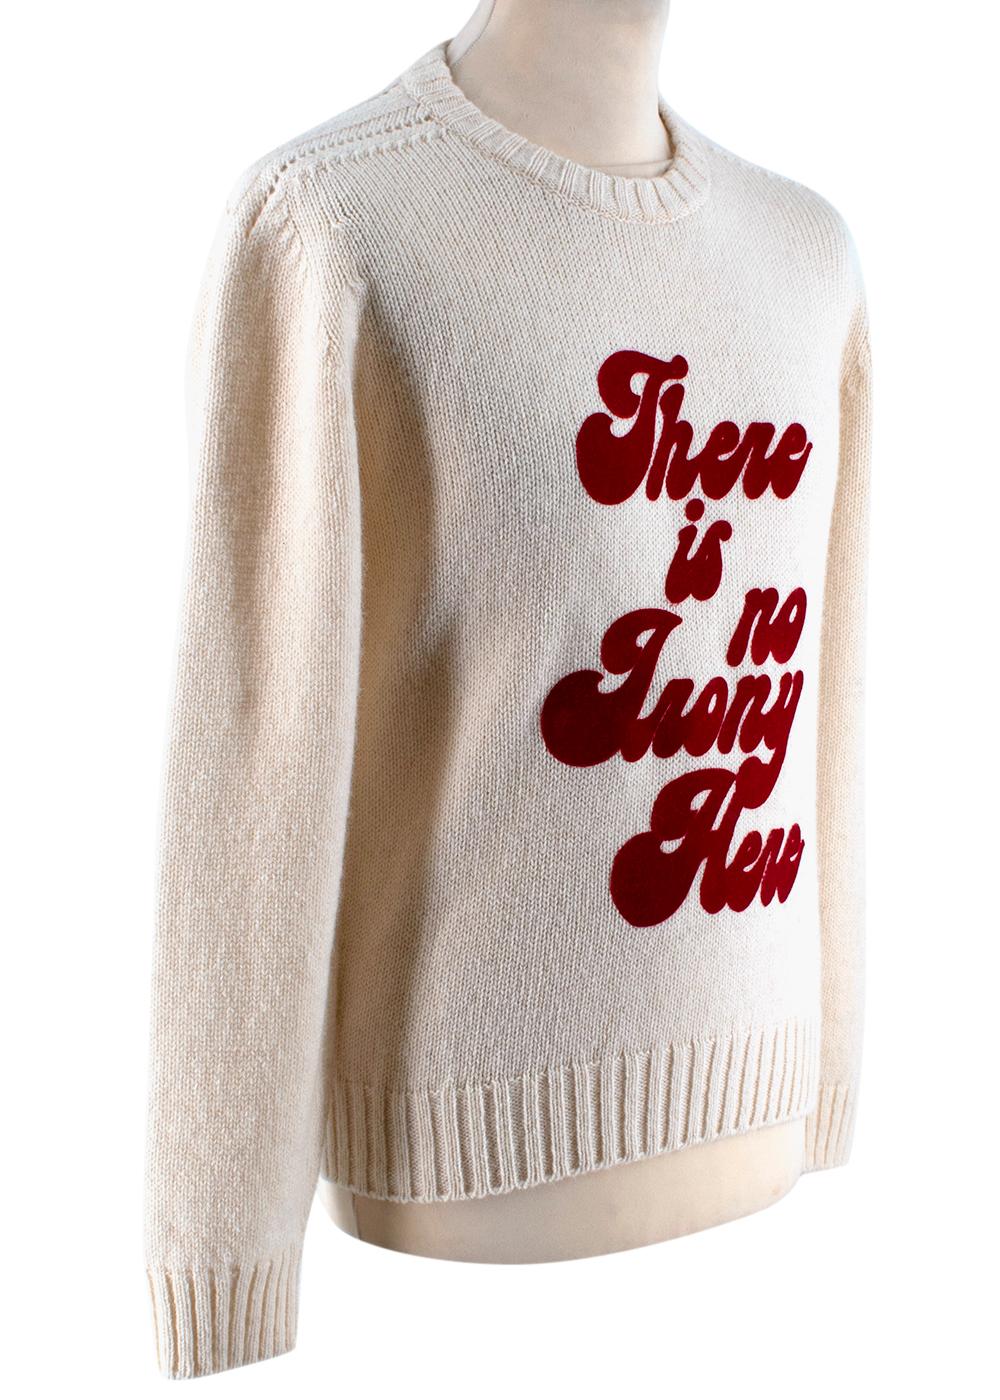 Celine Ivory Knitted Wool Sweatshirt with Red Velvet Print

- Rounded neckline
- Ribbed Knit to neckline, hemline and cuffs
- Lightweight Knit 
- Red velvet print to front 
- Textured knit to shoulders 

Materials 
100% Wool 

Hand Wash Only 

Made